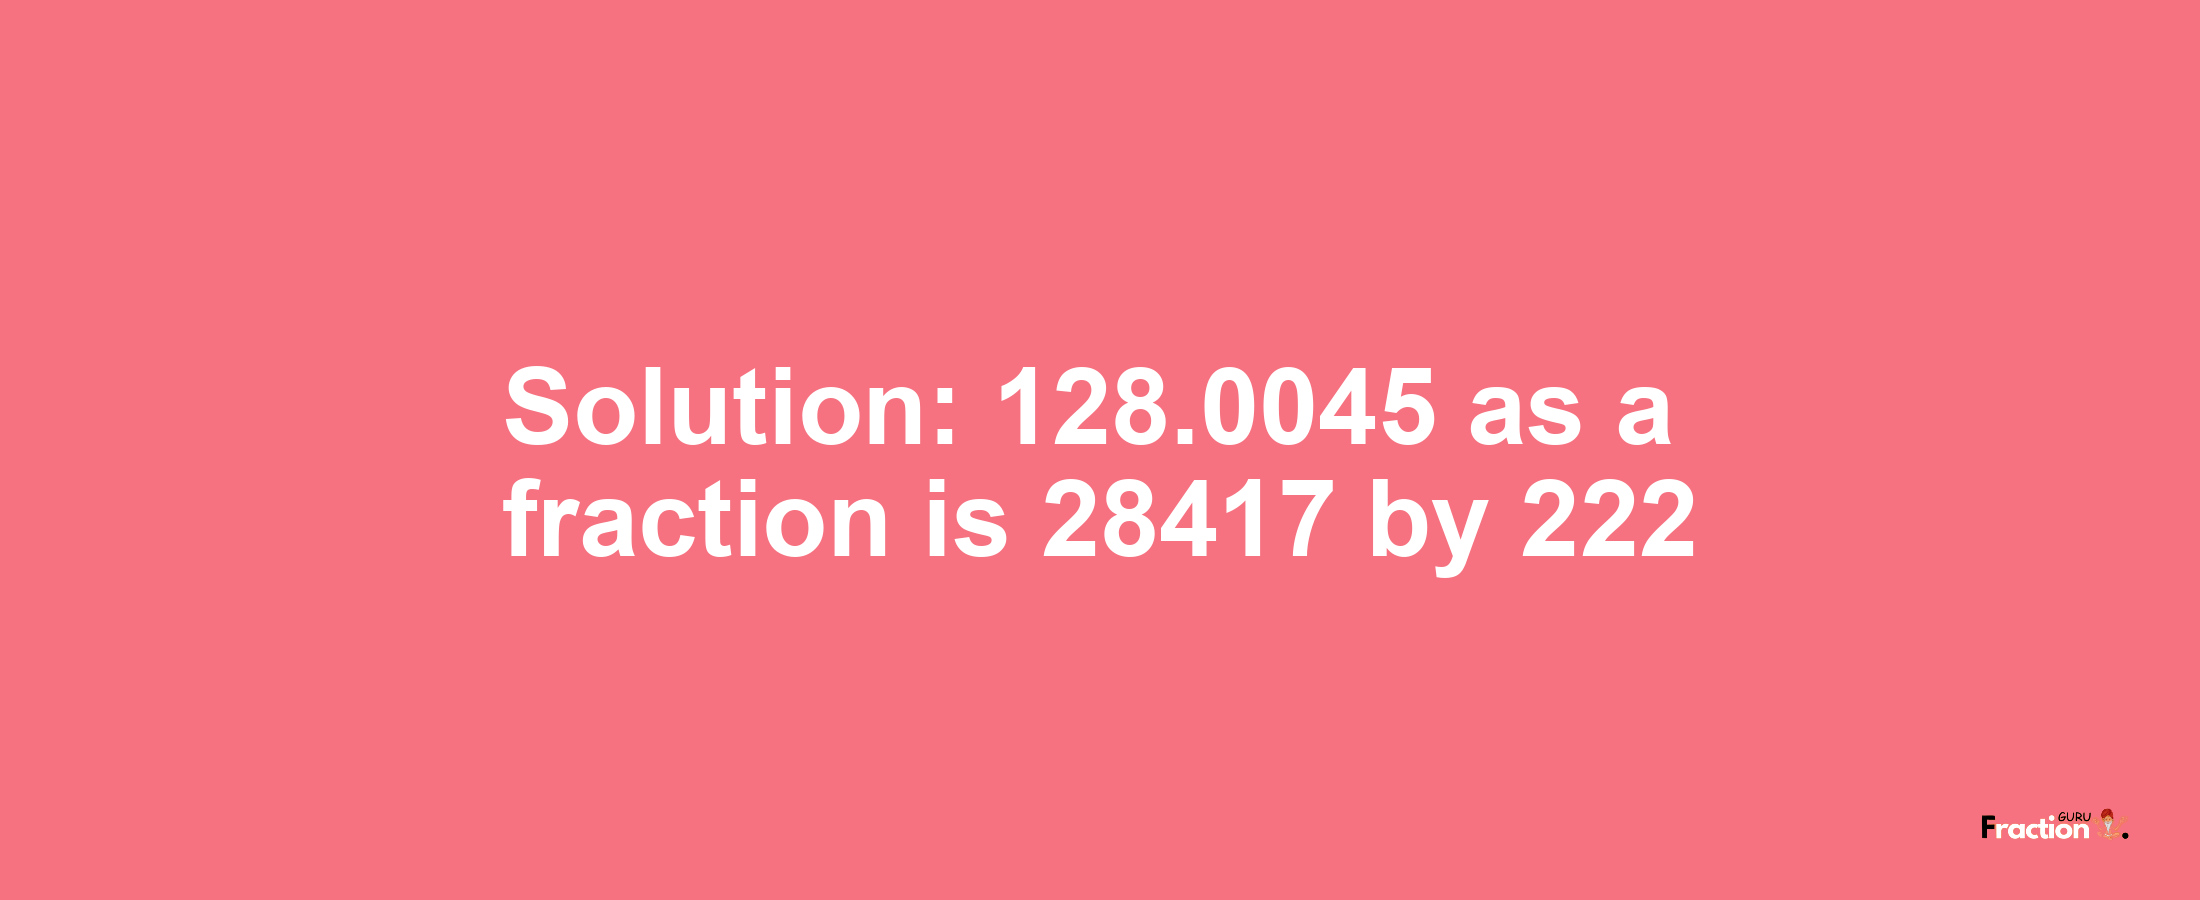 Solution:128.0045 as a fraction is 28417/222